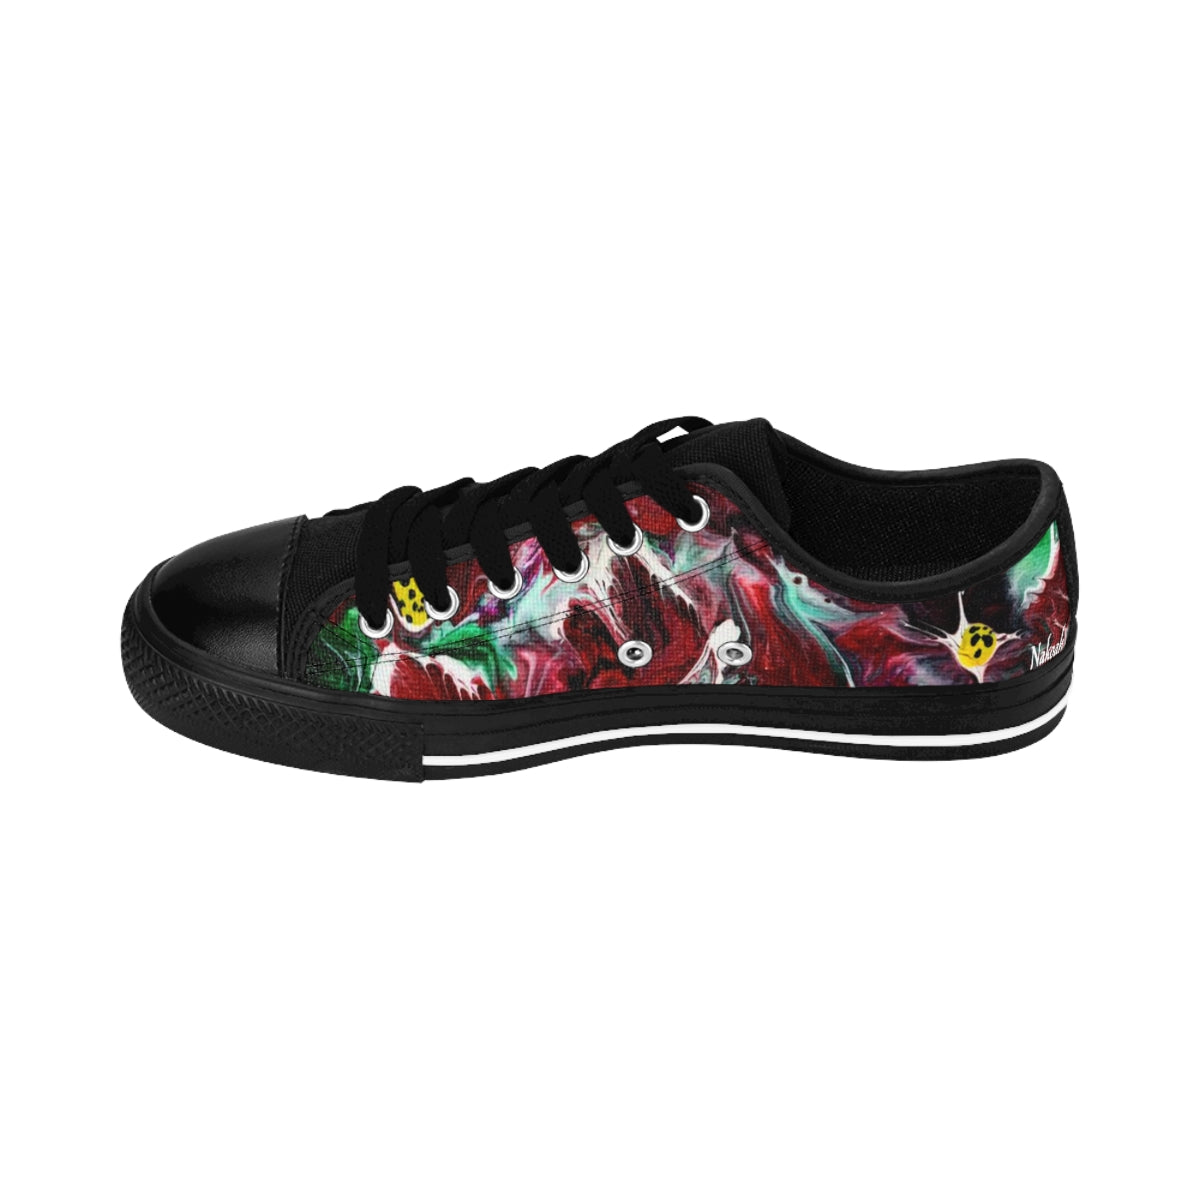 Pansy Passion Women's Sneakers